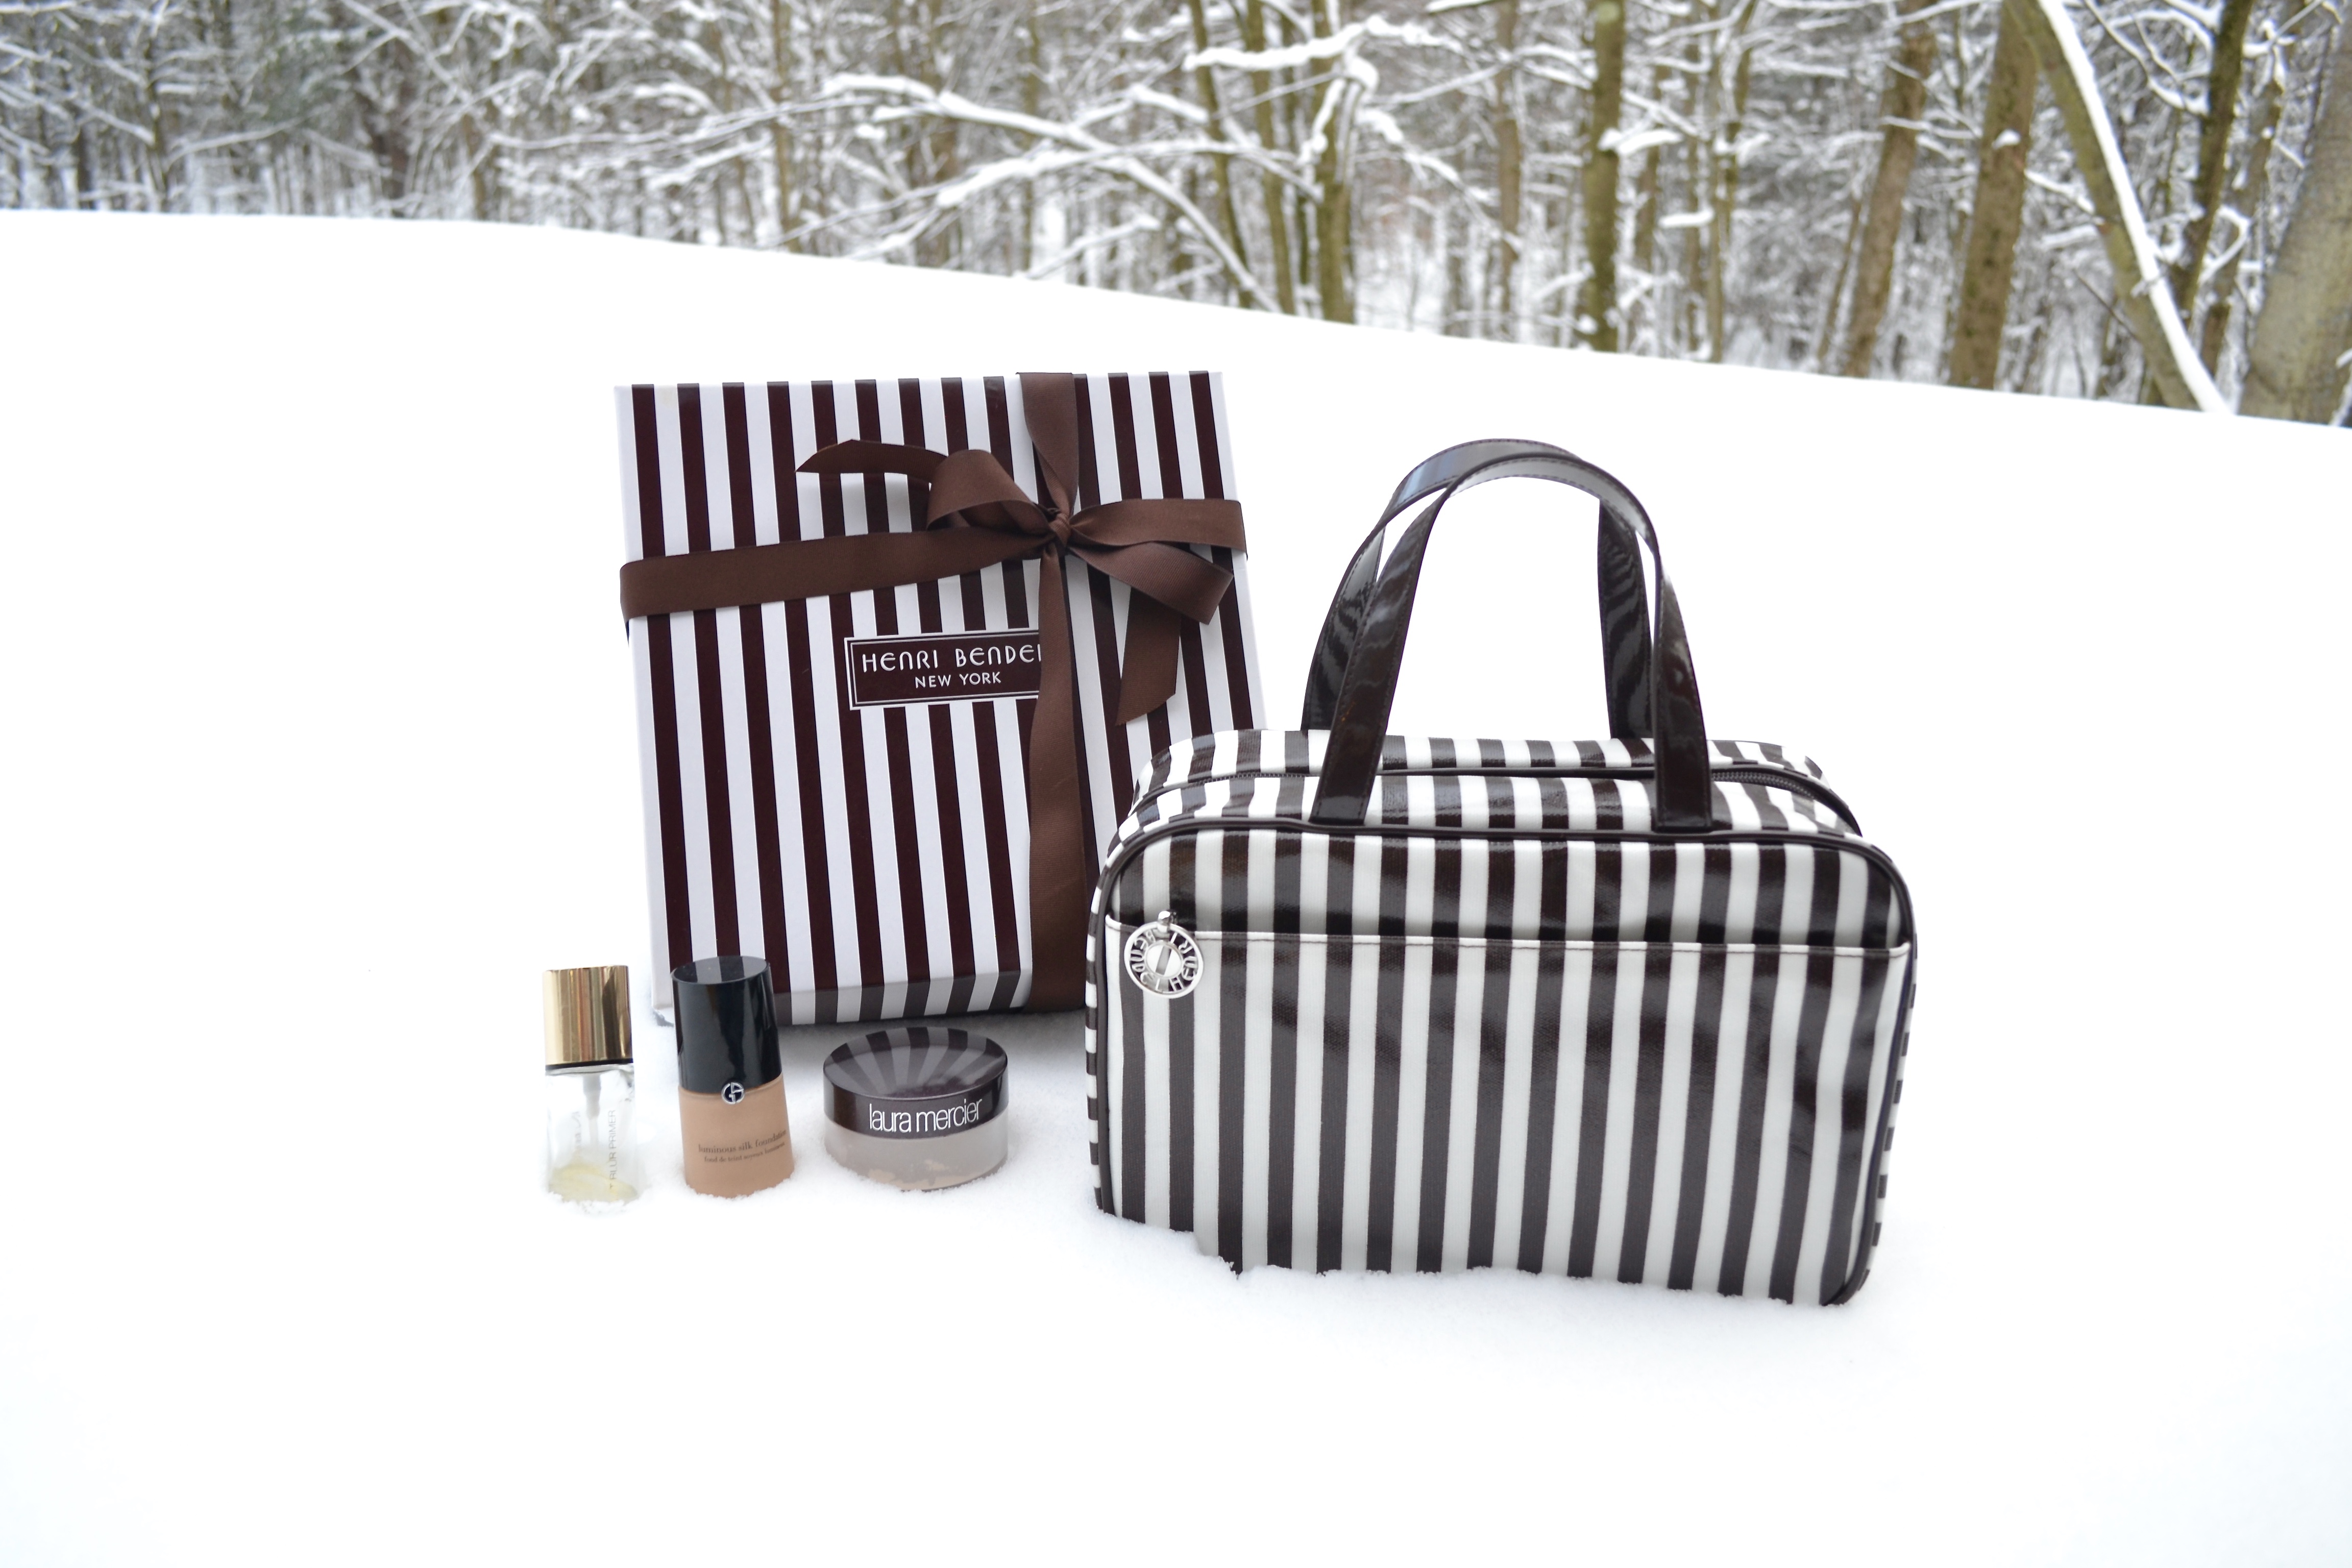 Henri Bendel Makeup Case and makeup products |How to Pack Your Makeup Products|